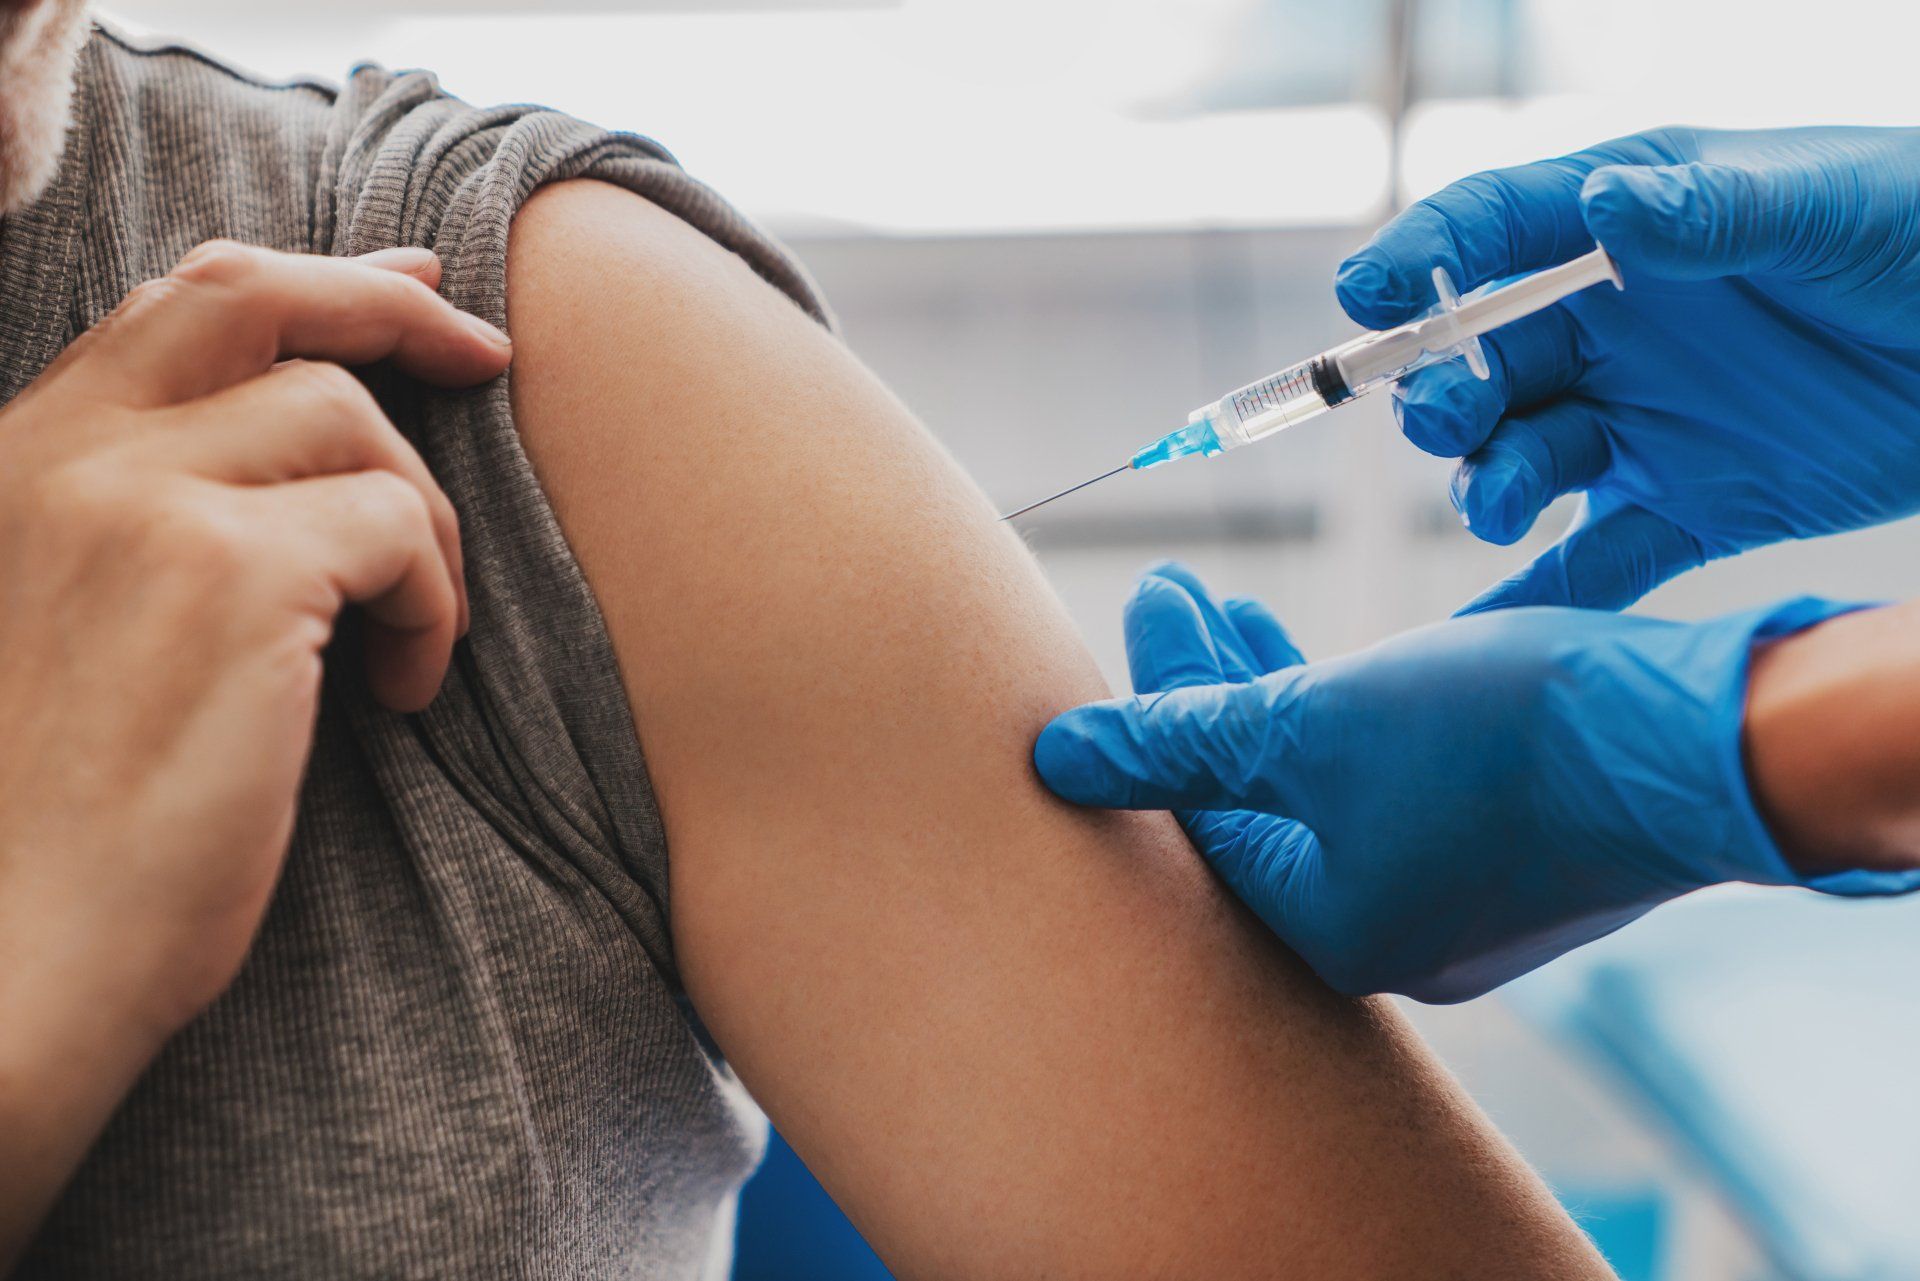 Hands with Gloves Injecting a Vaccine — Memphis, TN — Vaccine Injury Lawyers